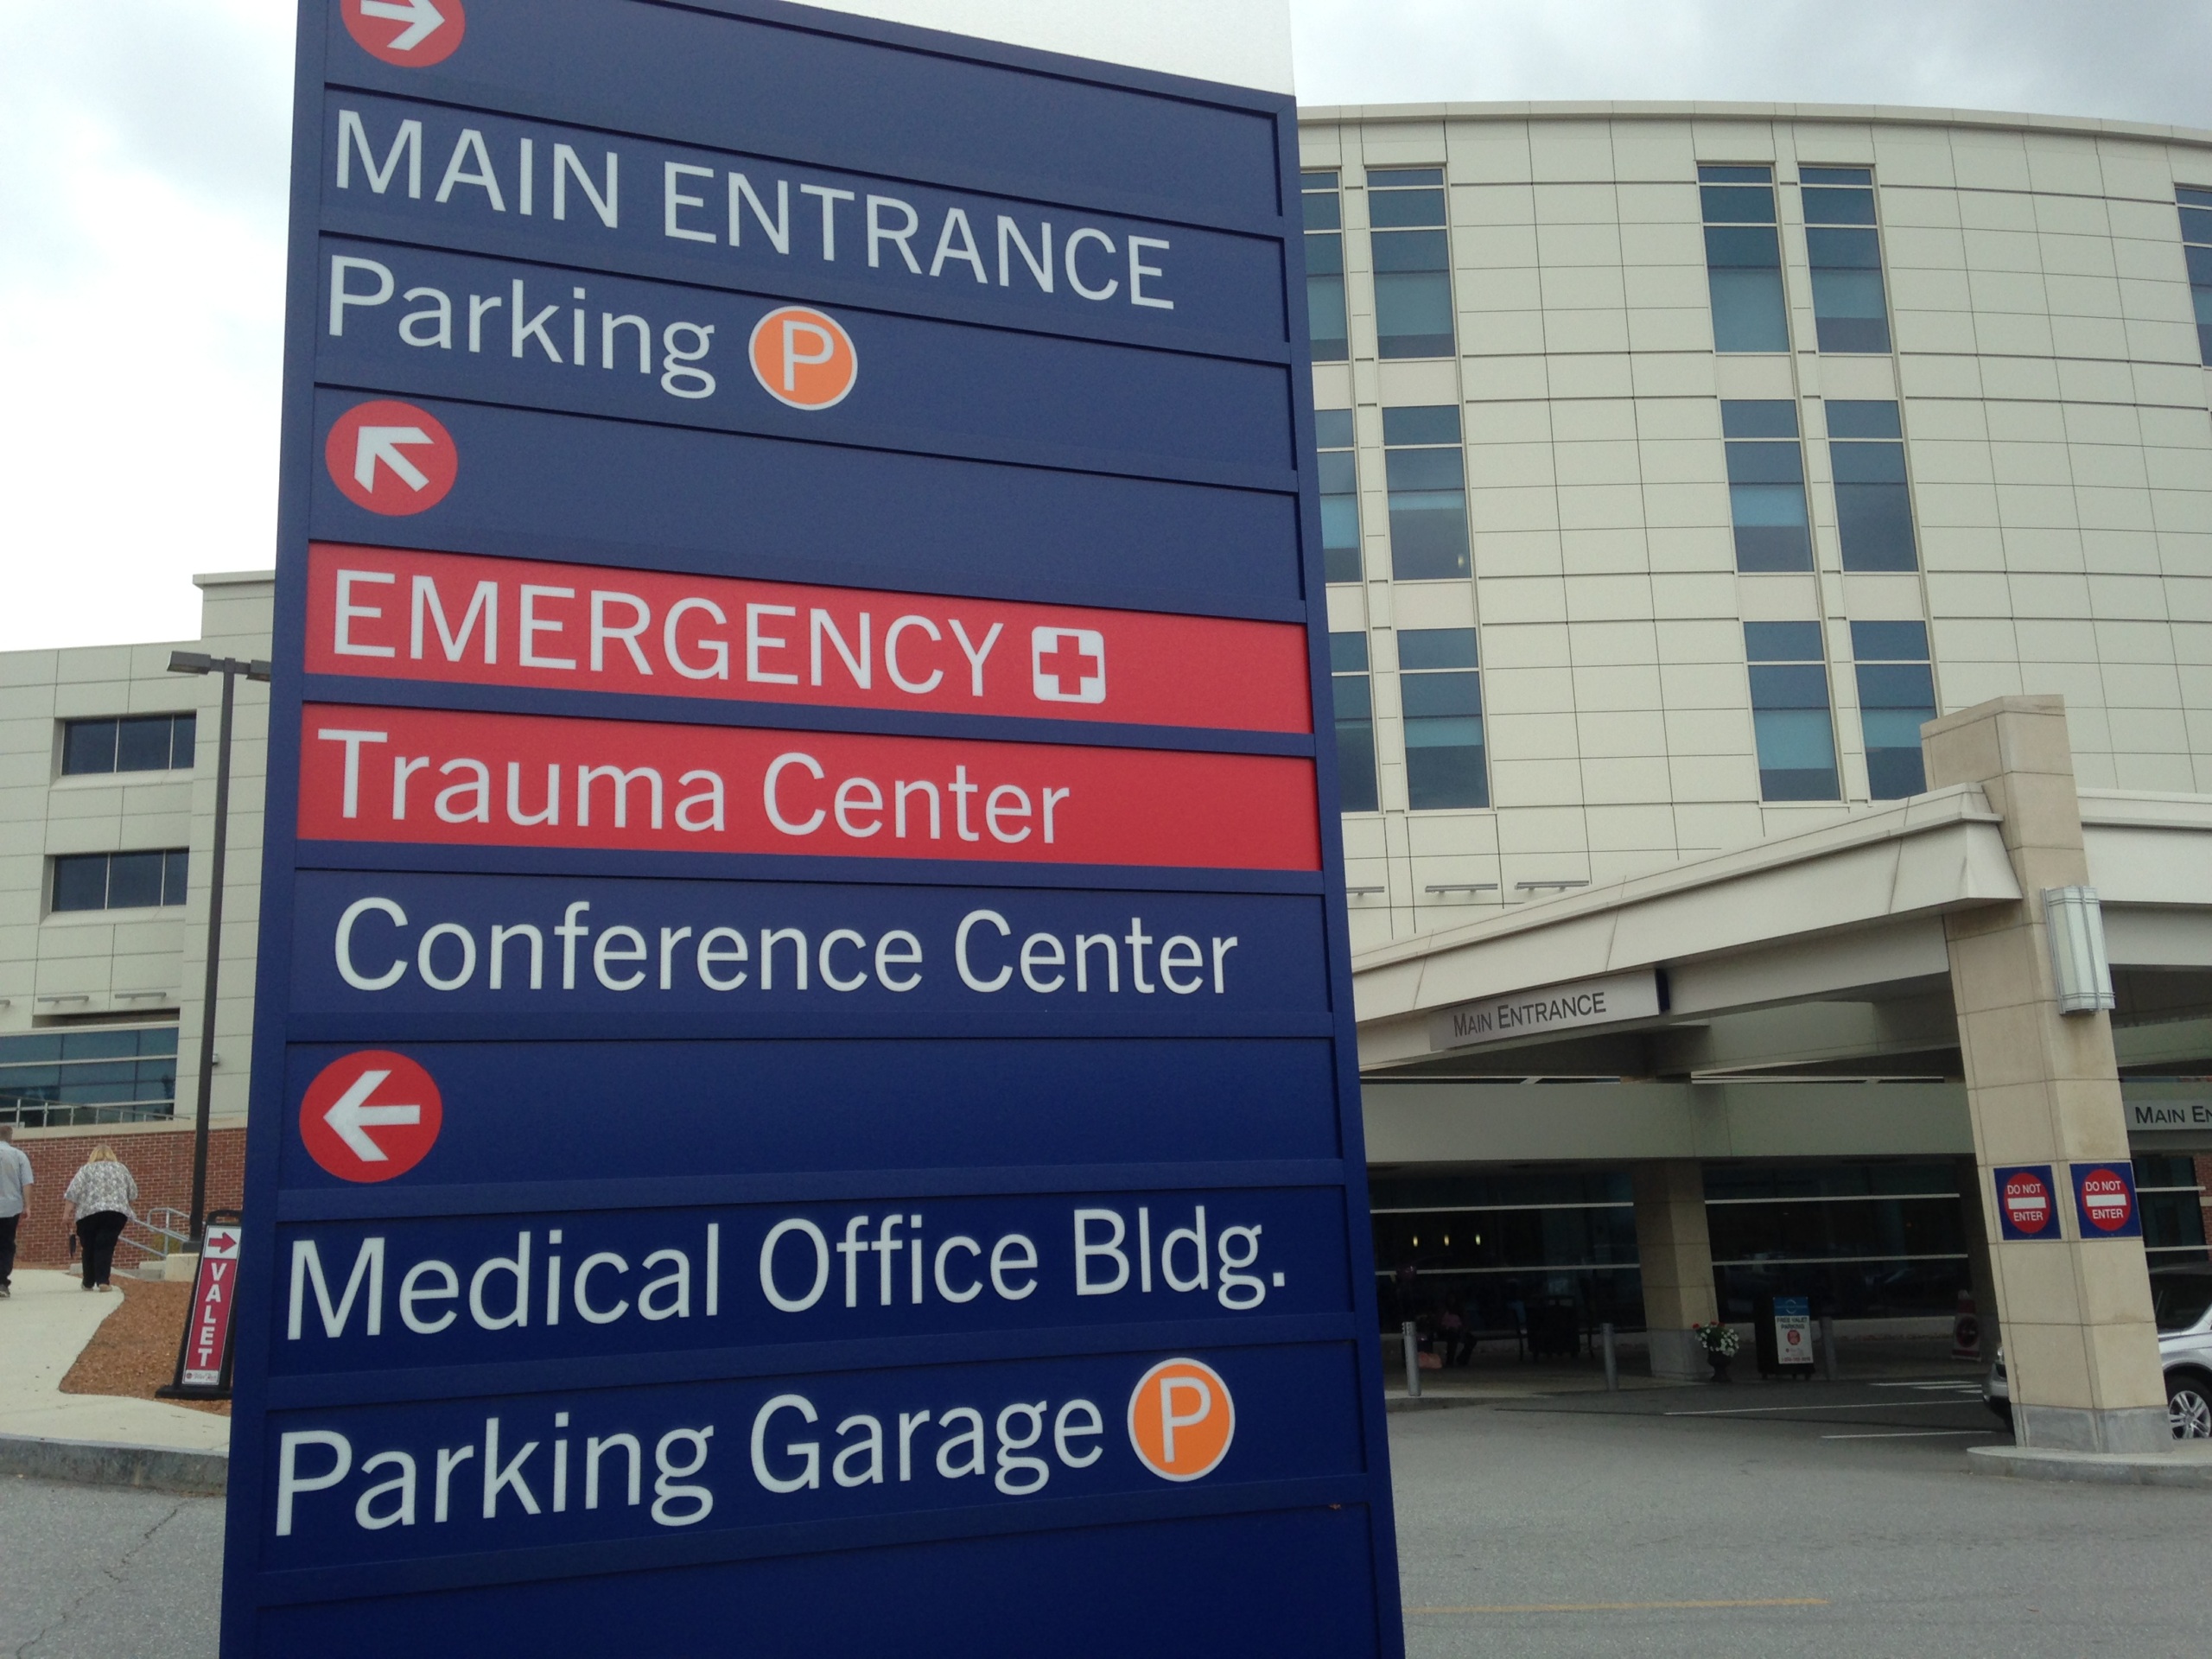 A sign in front of a hospital indicates where the main entrance, emergency room, and other destinations are located.